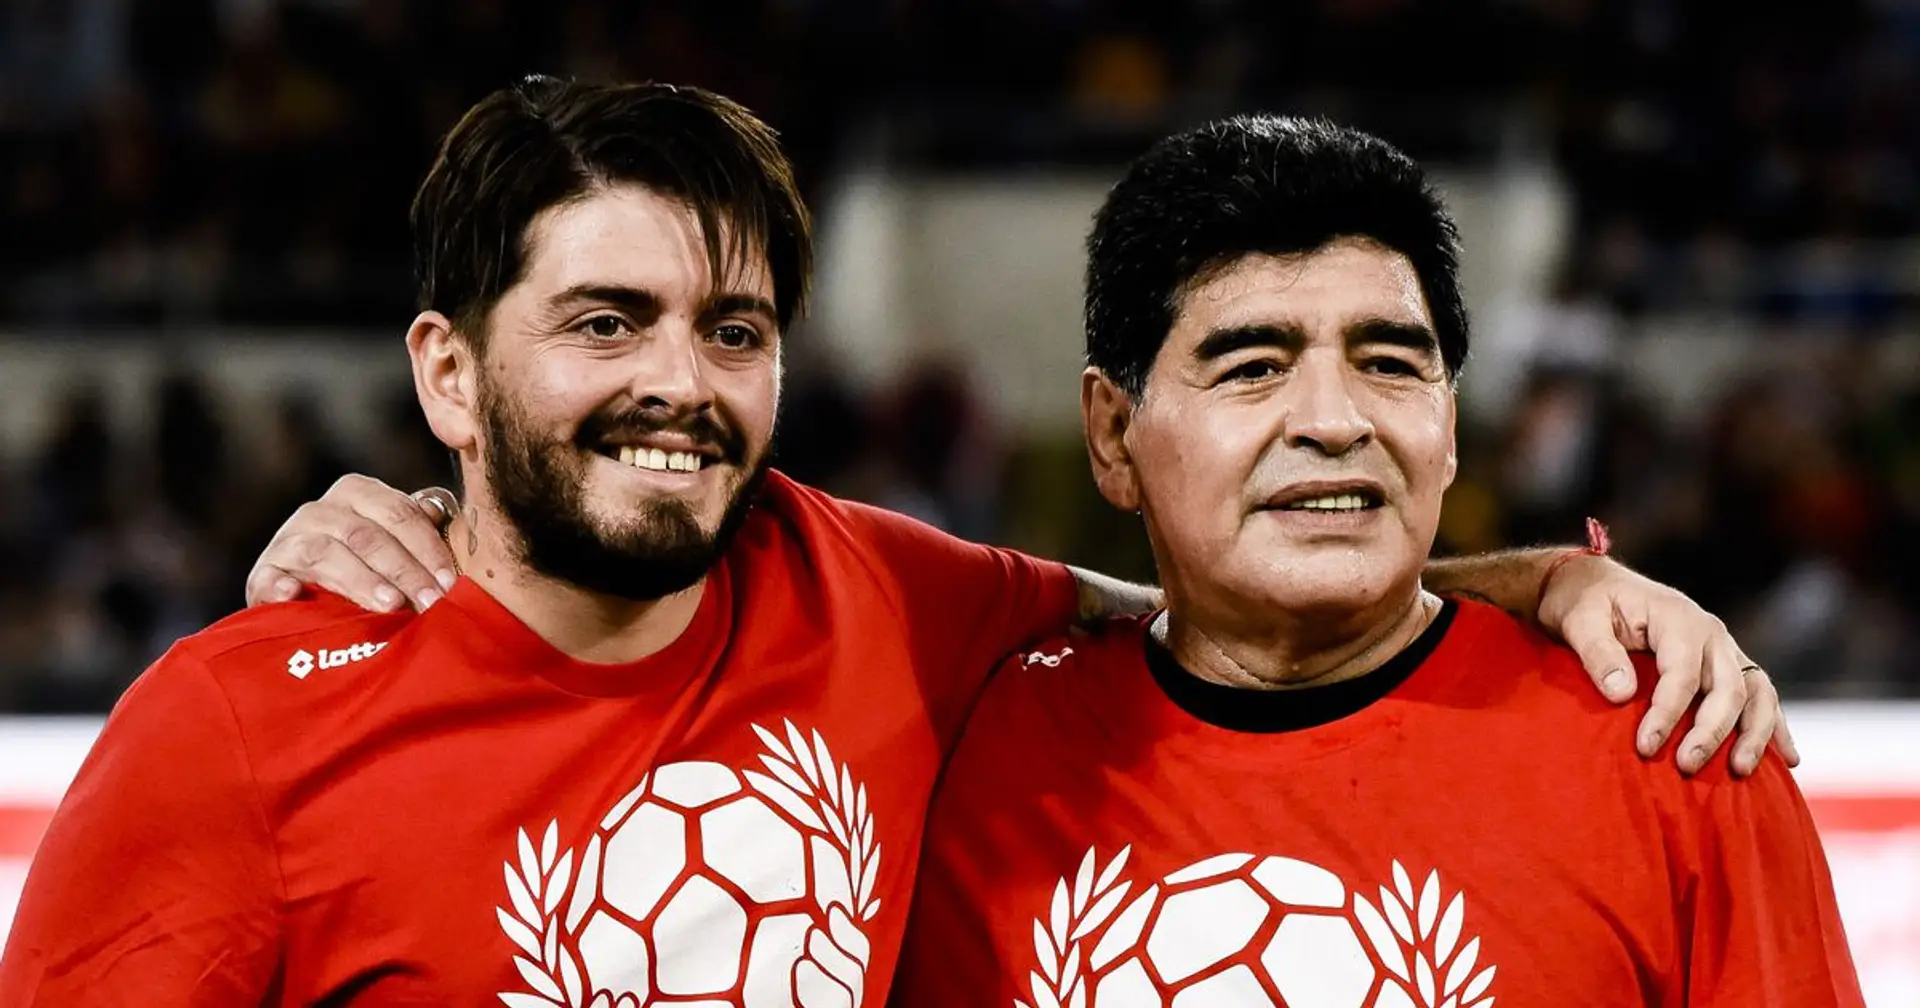 Diego Maradona Jr. believes No.10 shirt should be retired in all of his father's former teams, including Barcelona